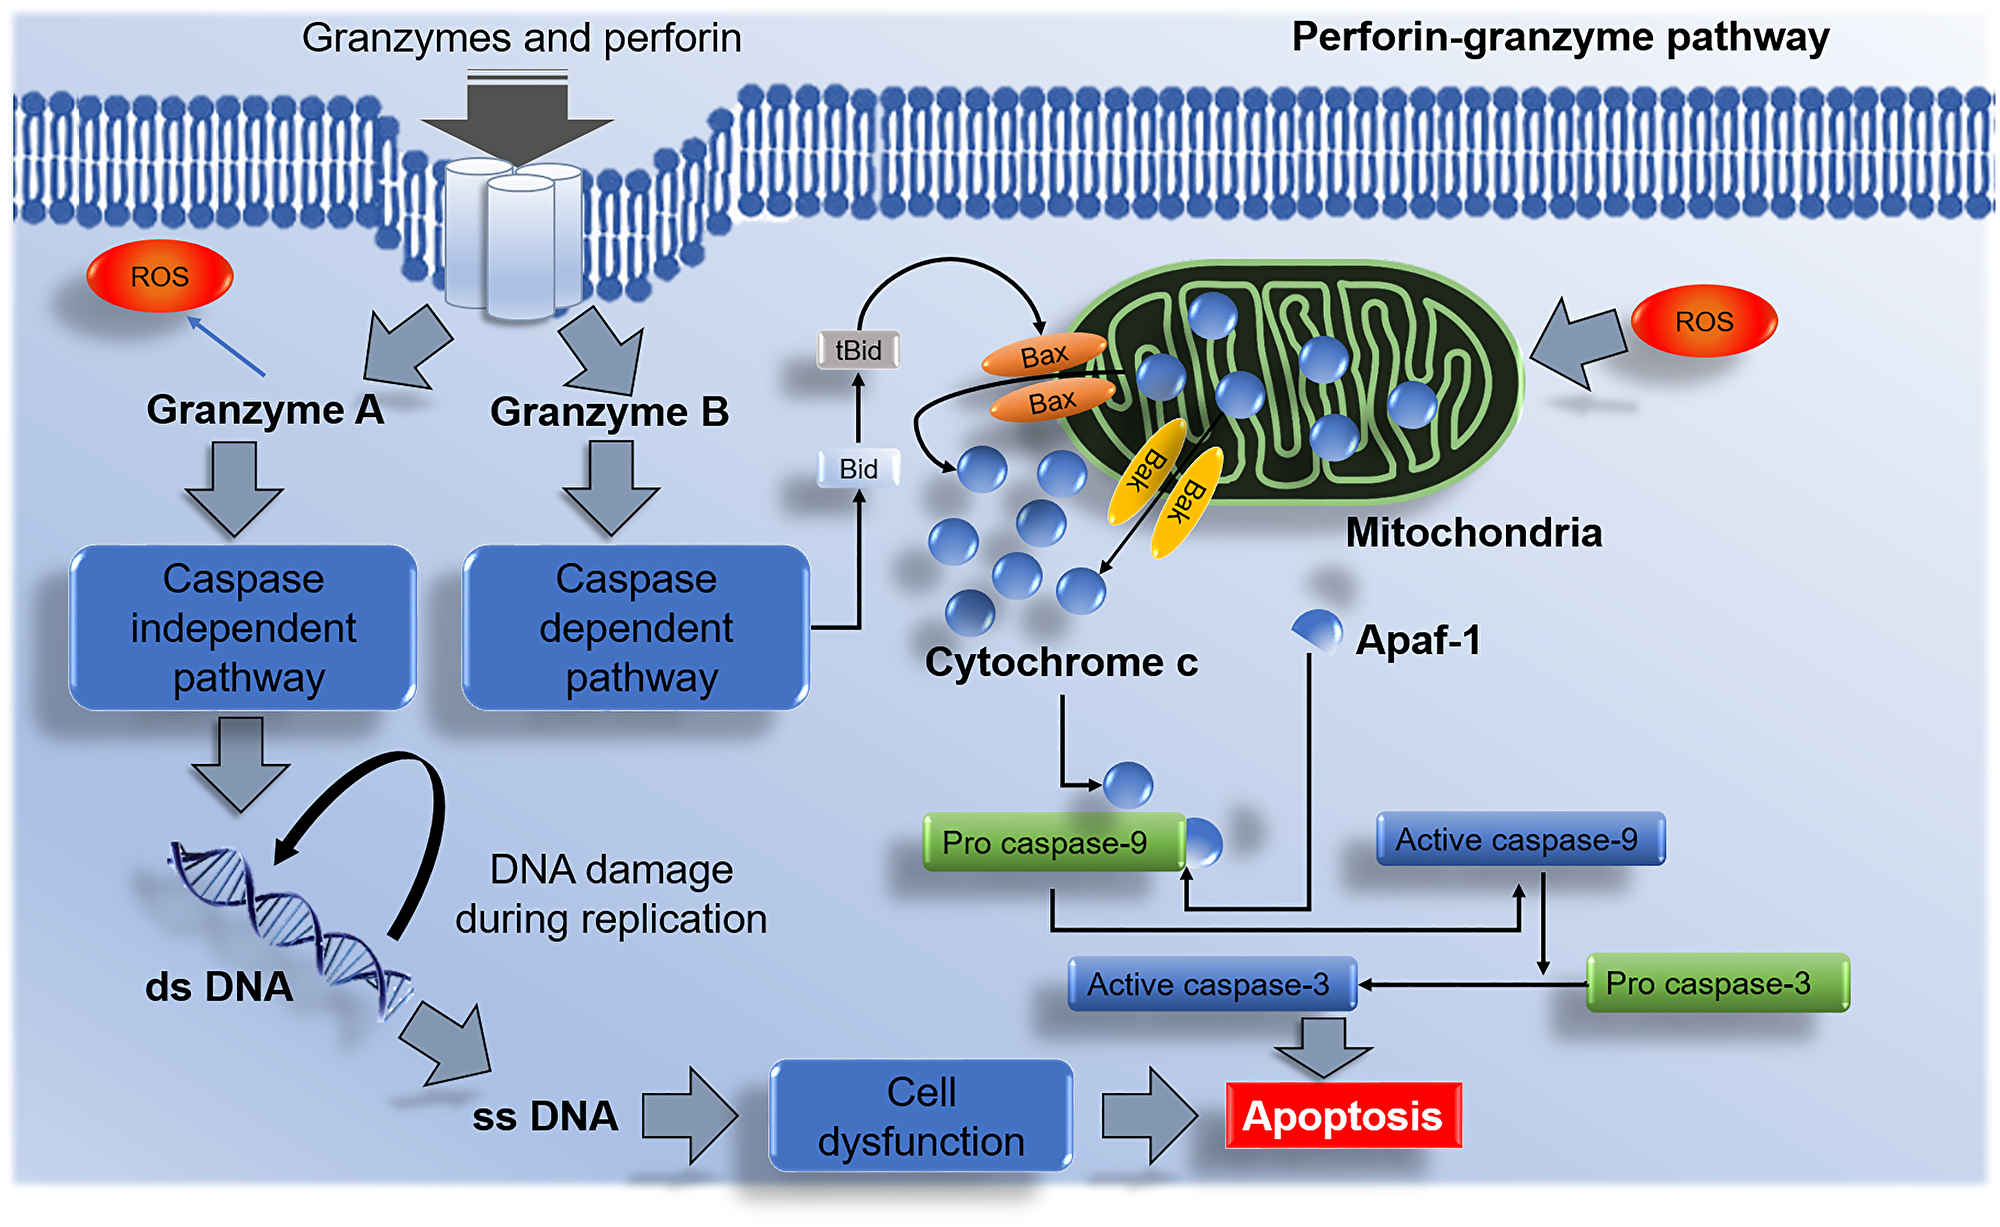 Perforin-granzyme NK cells mediated apoptotic pathway.